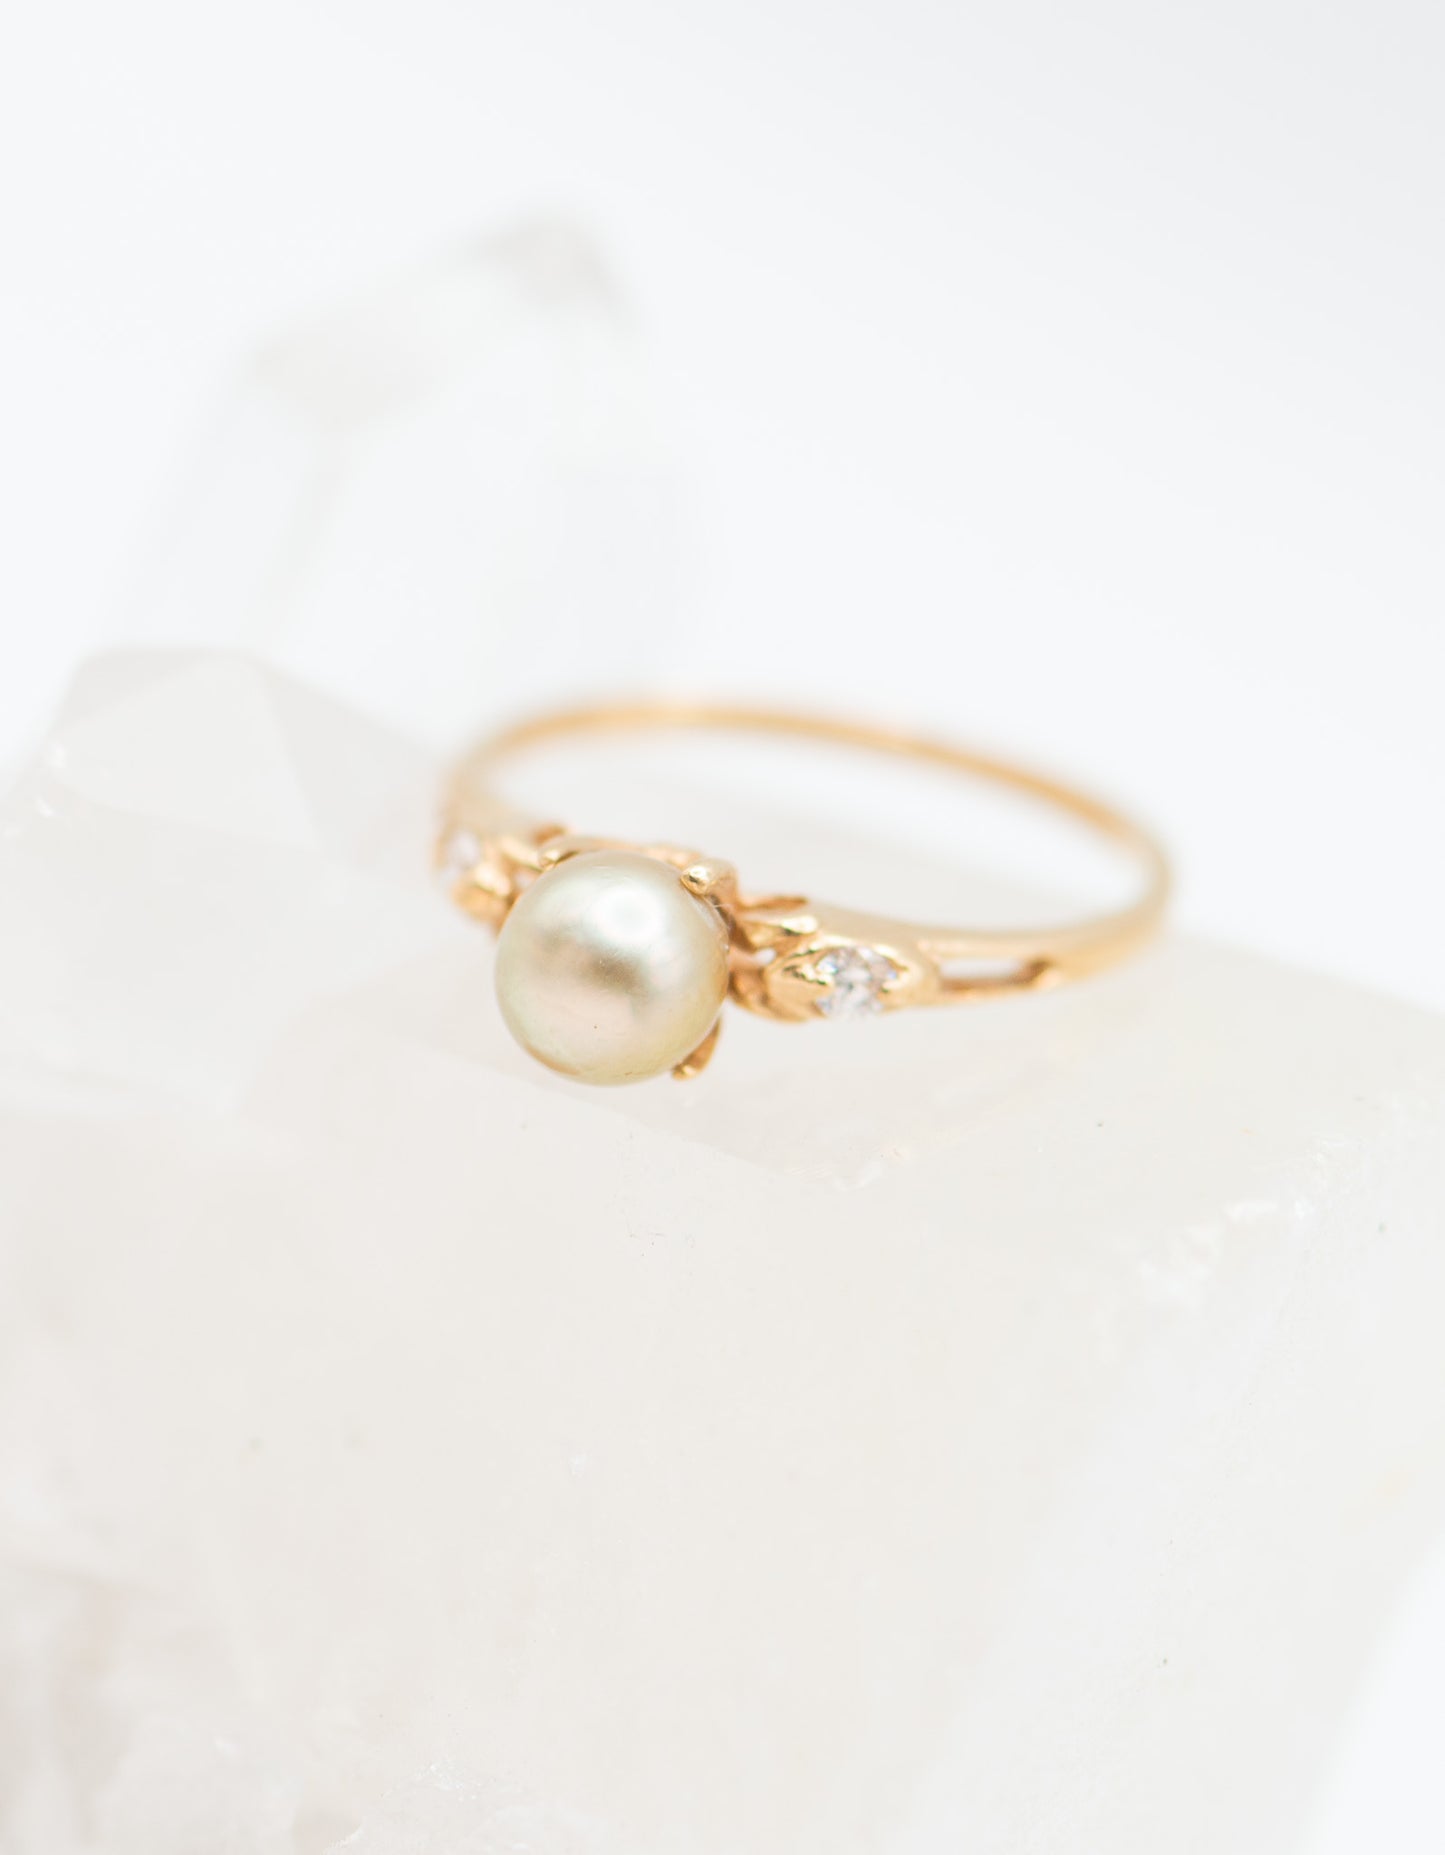 Tan Pearl ring with Diamond accents